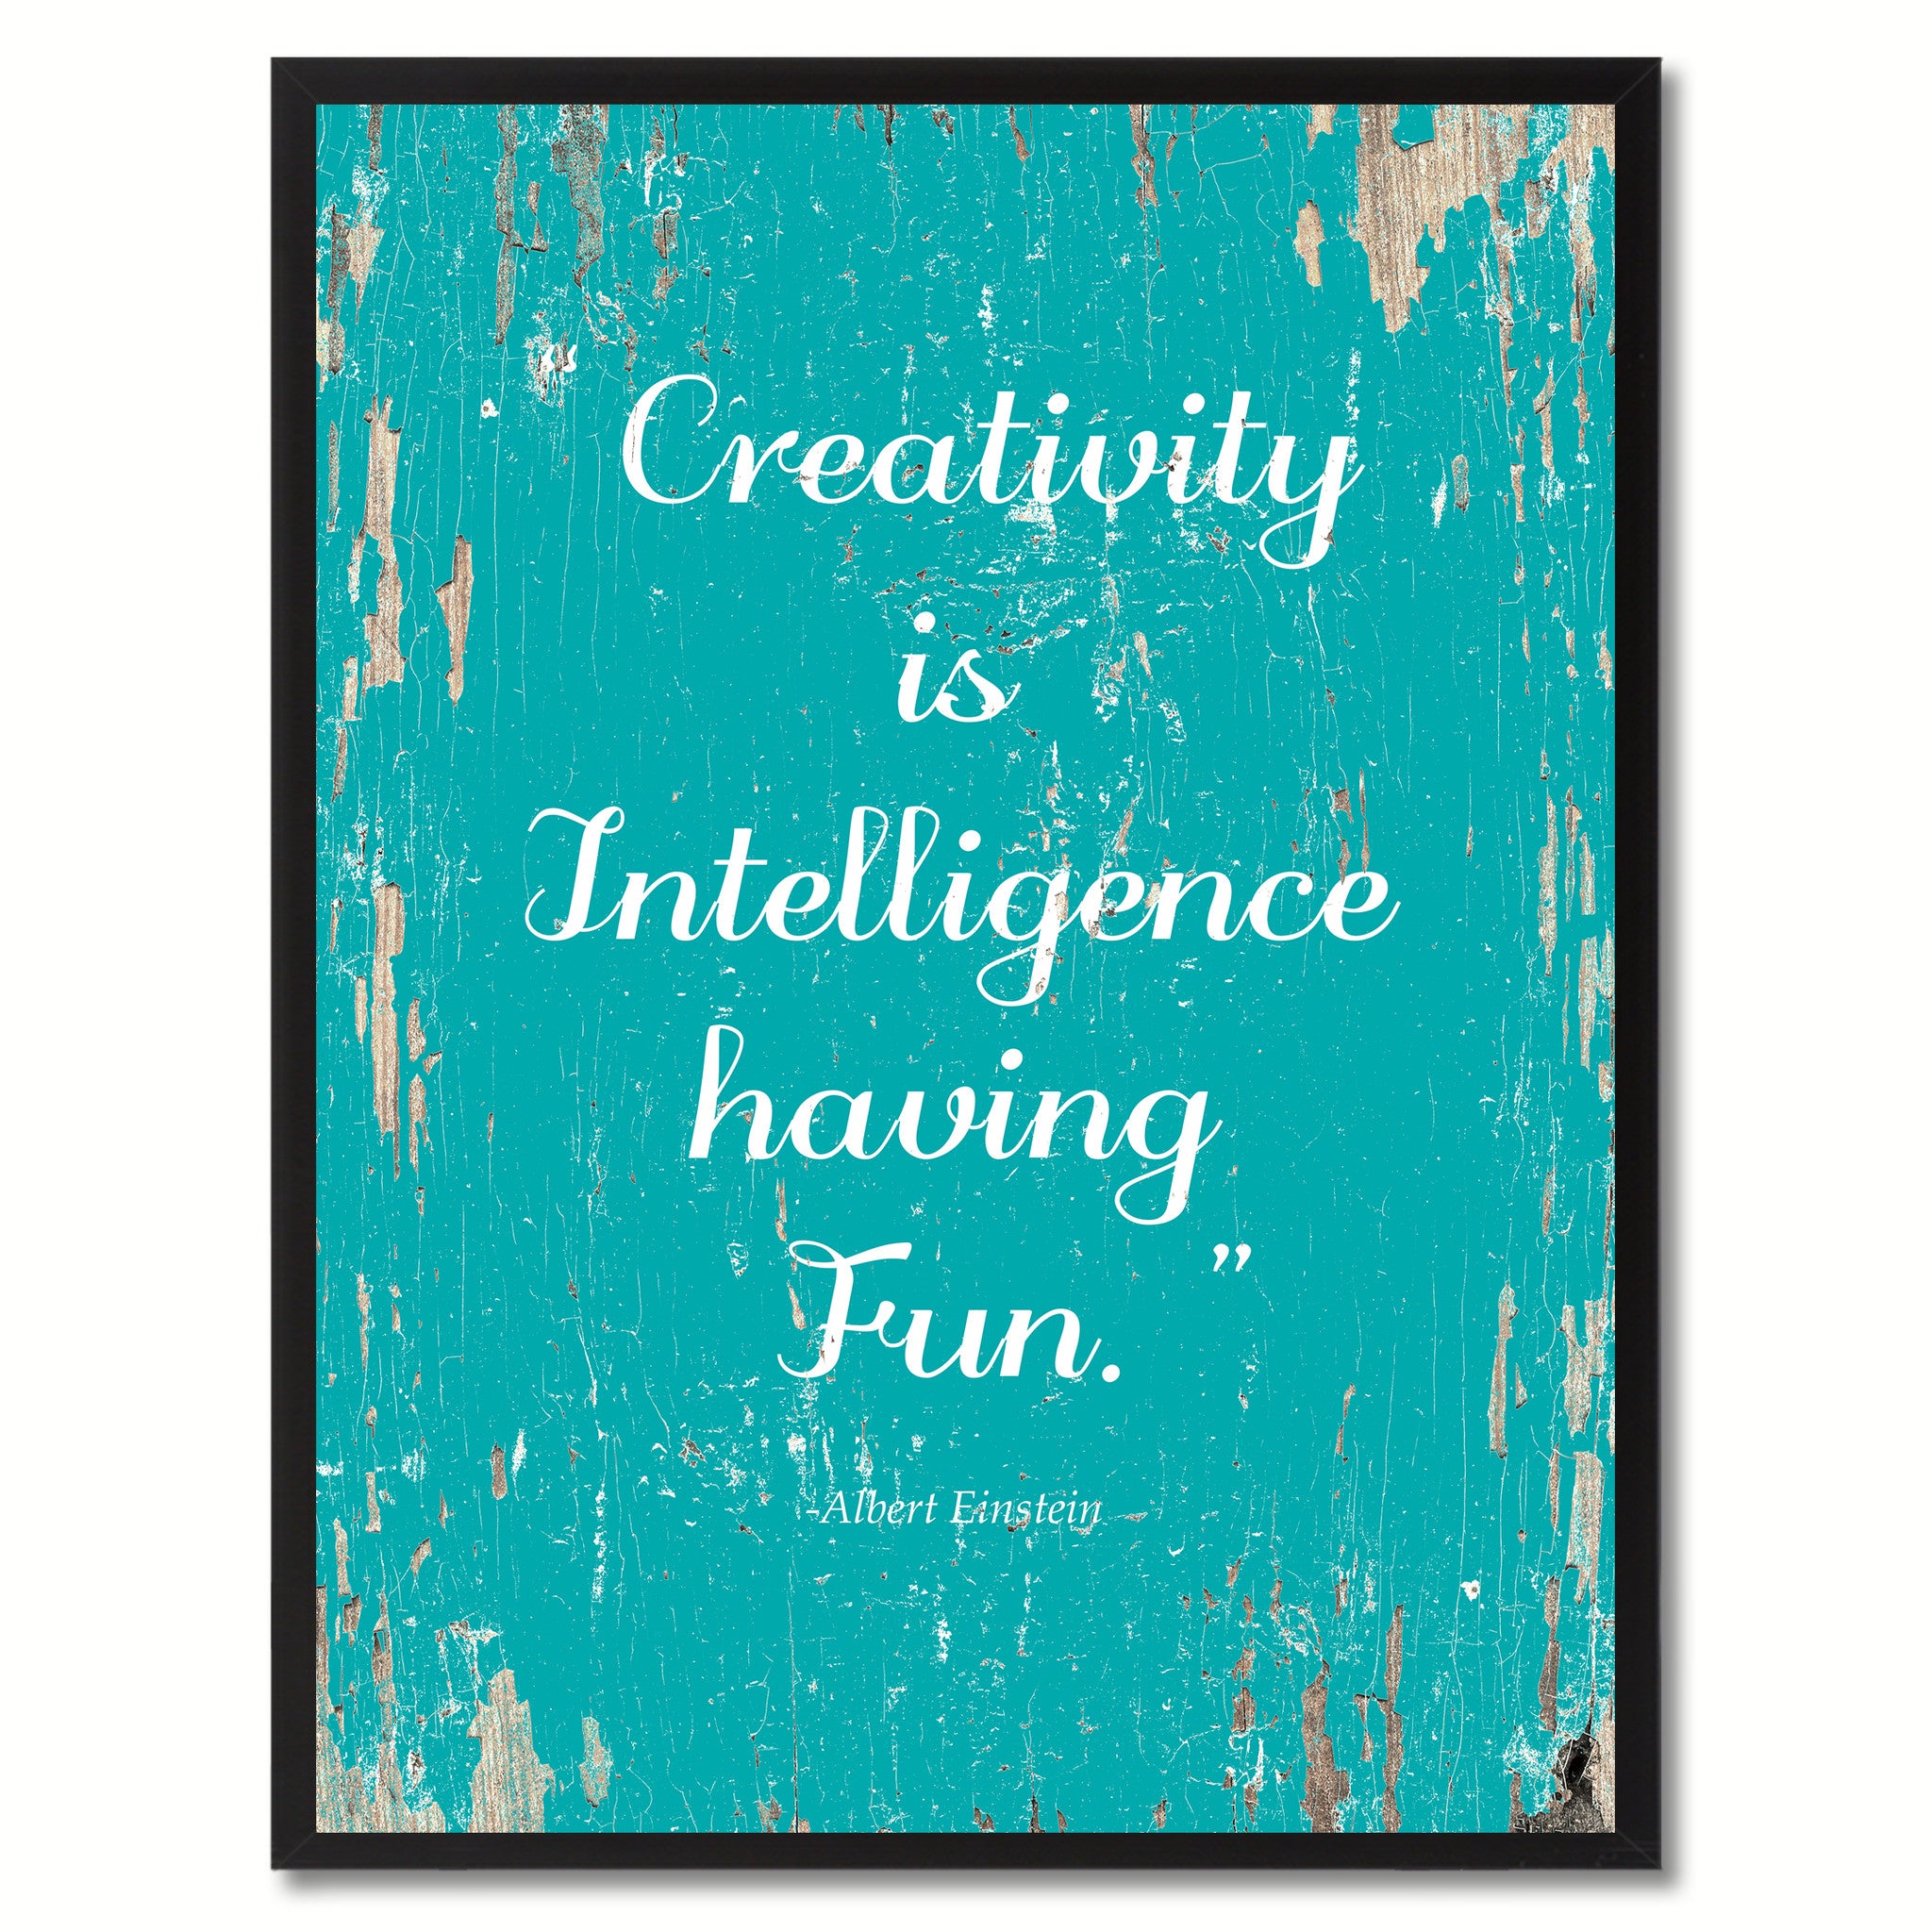 Creativity Is Intelligence Having Fun Albert Einstein Saying Motivation Quote Canvas Print, Black Picture Frame Home Decor Wall Art Gifts